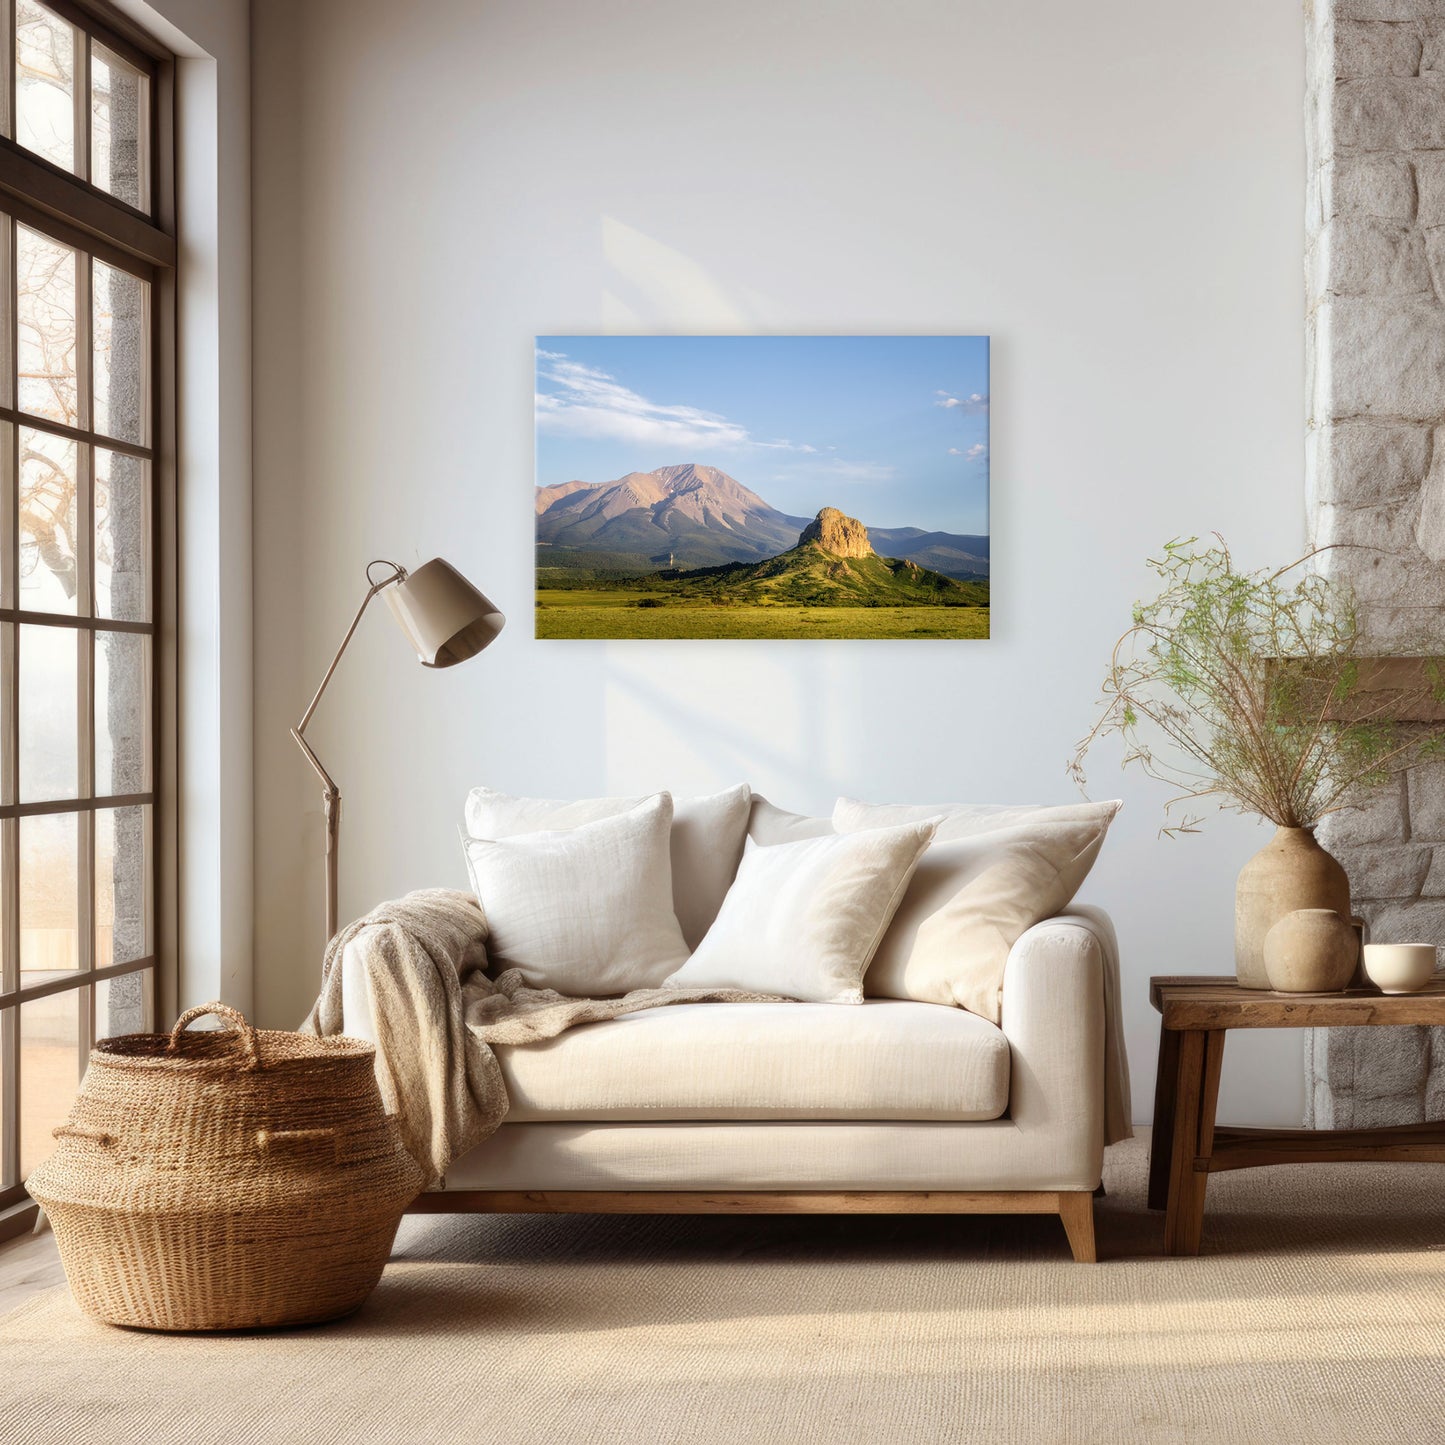 This wall art canvas presents a stunning view of Colorado's landscape, with a focus on Goemmer Butte, captured through the lens of nature photography.